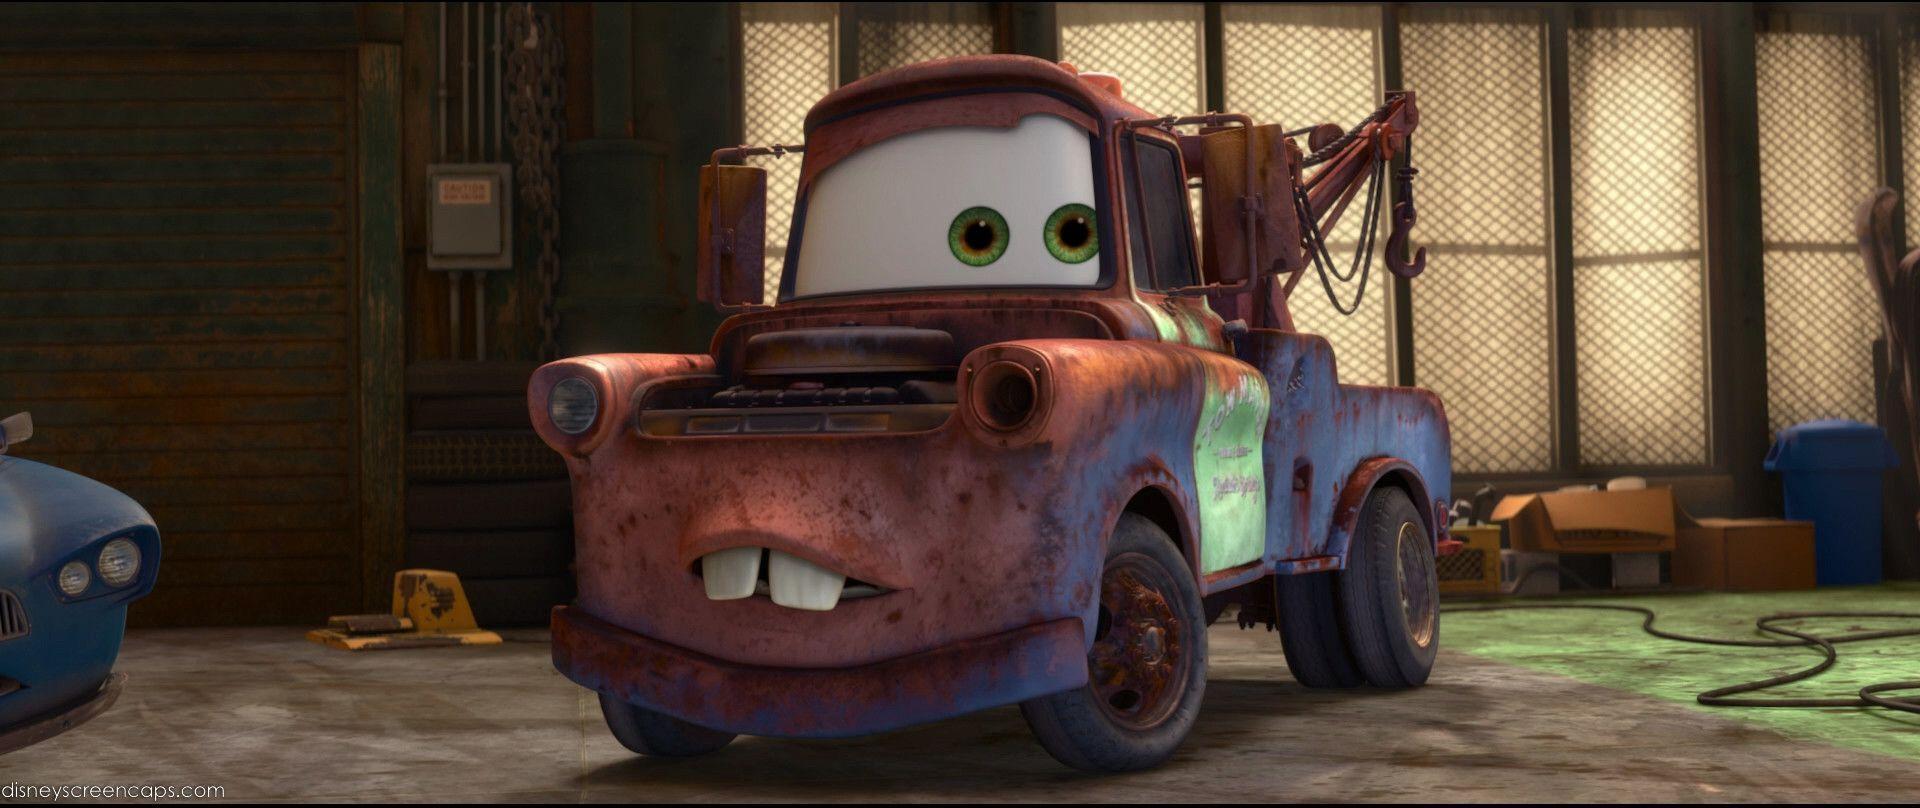 Mater The Tow Truck From Pixar S Cars Movie Wallpapers Click.